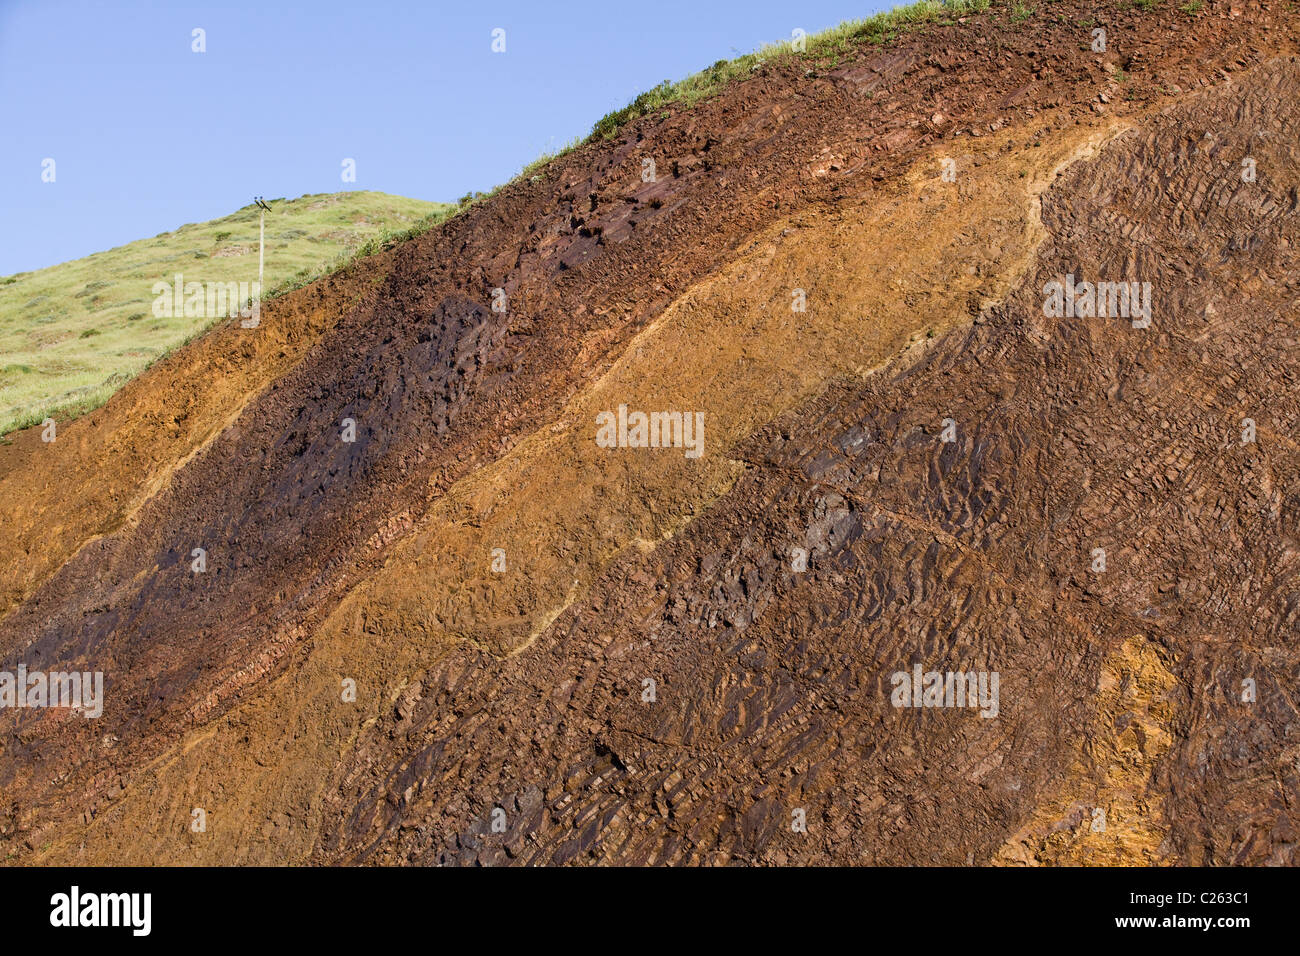 A cross section view of hillside, showing layers of differing soil and rock - California USA Stock Photo